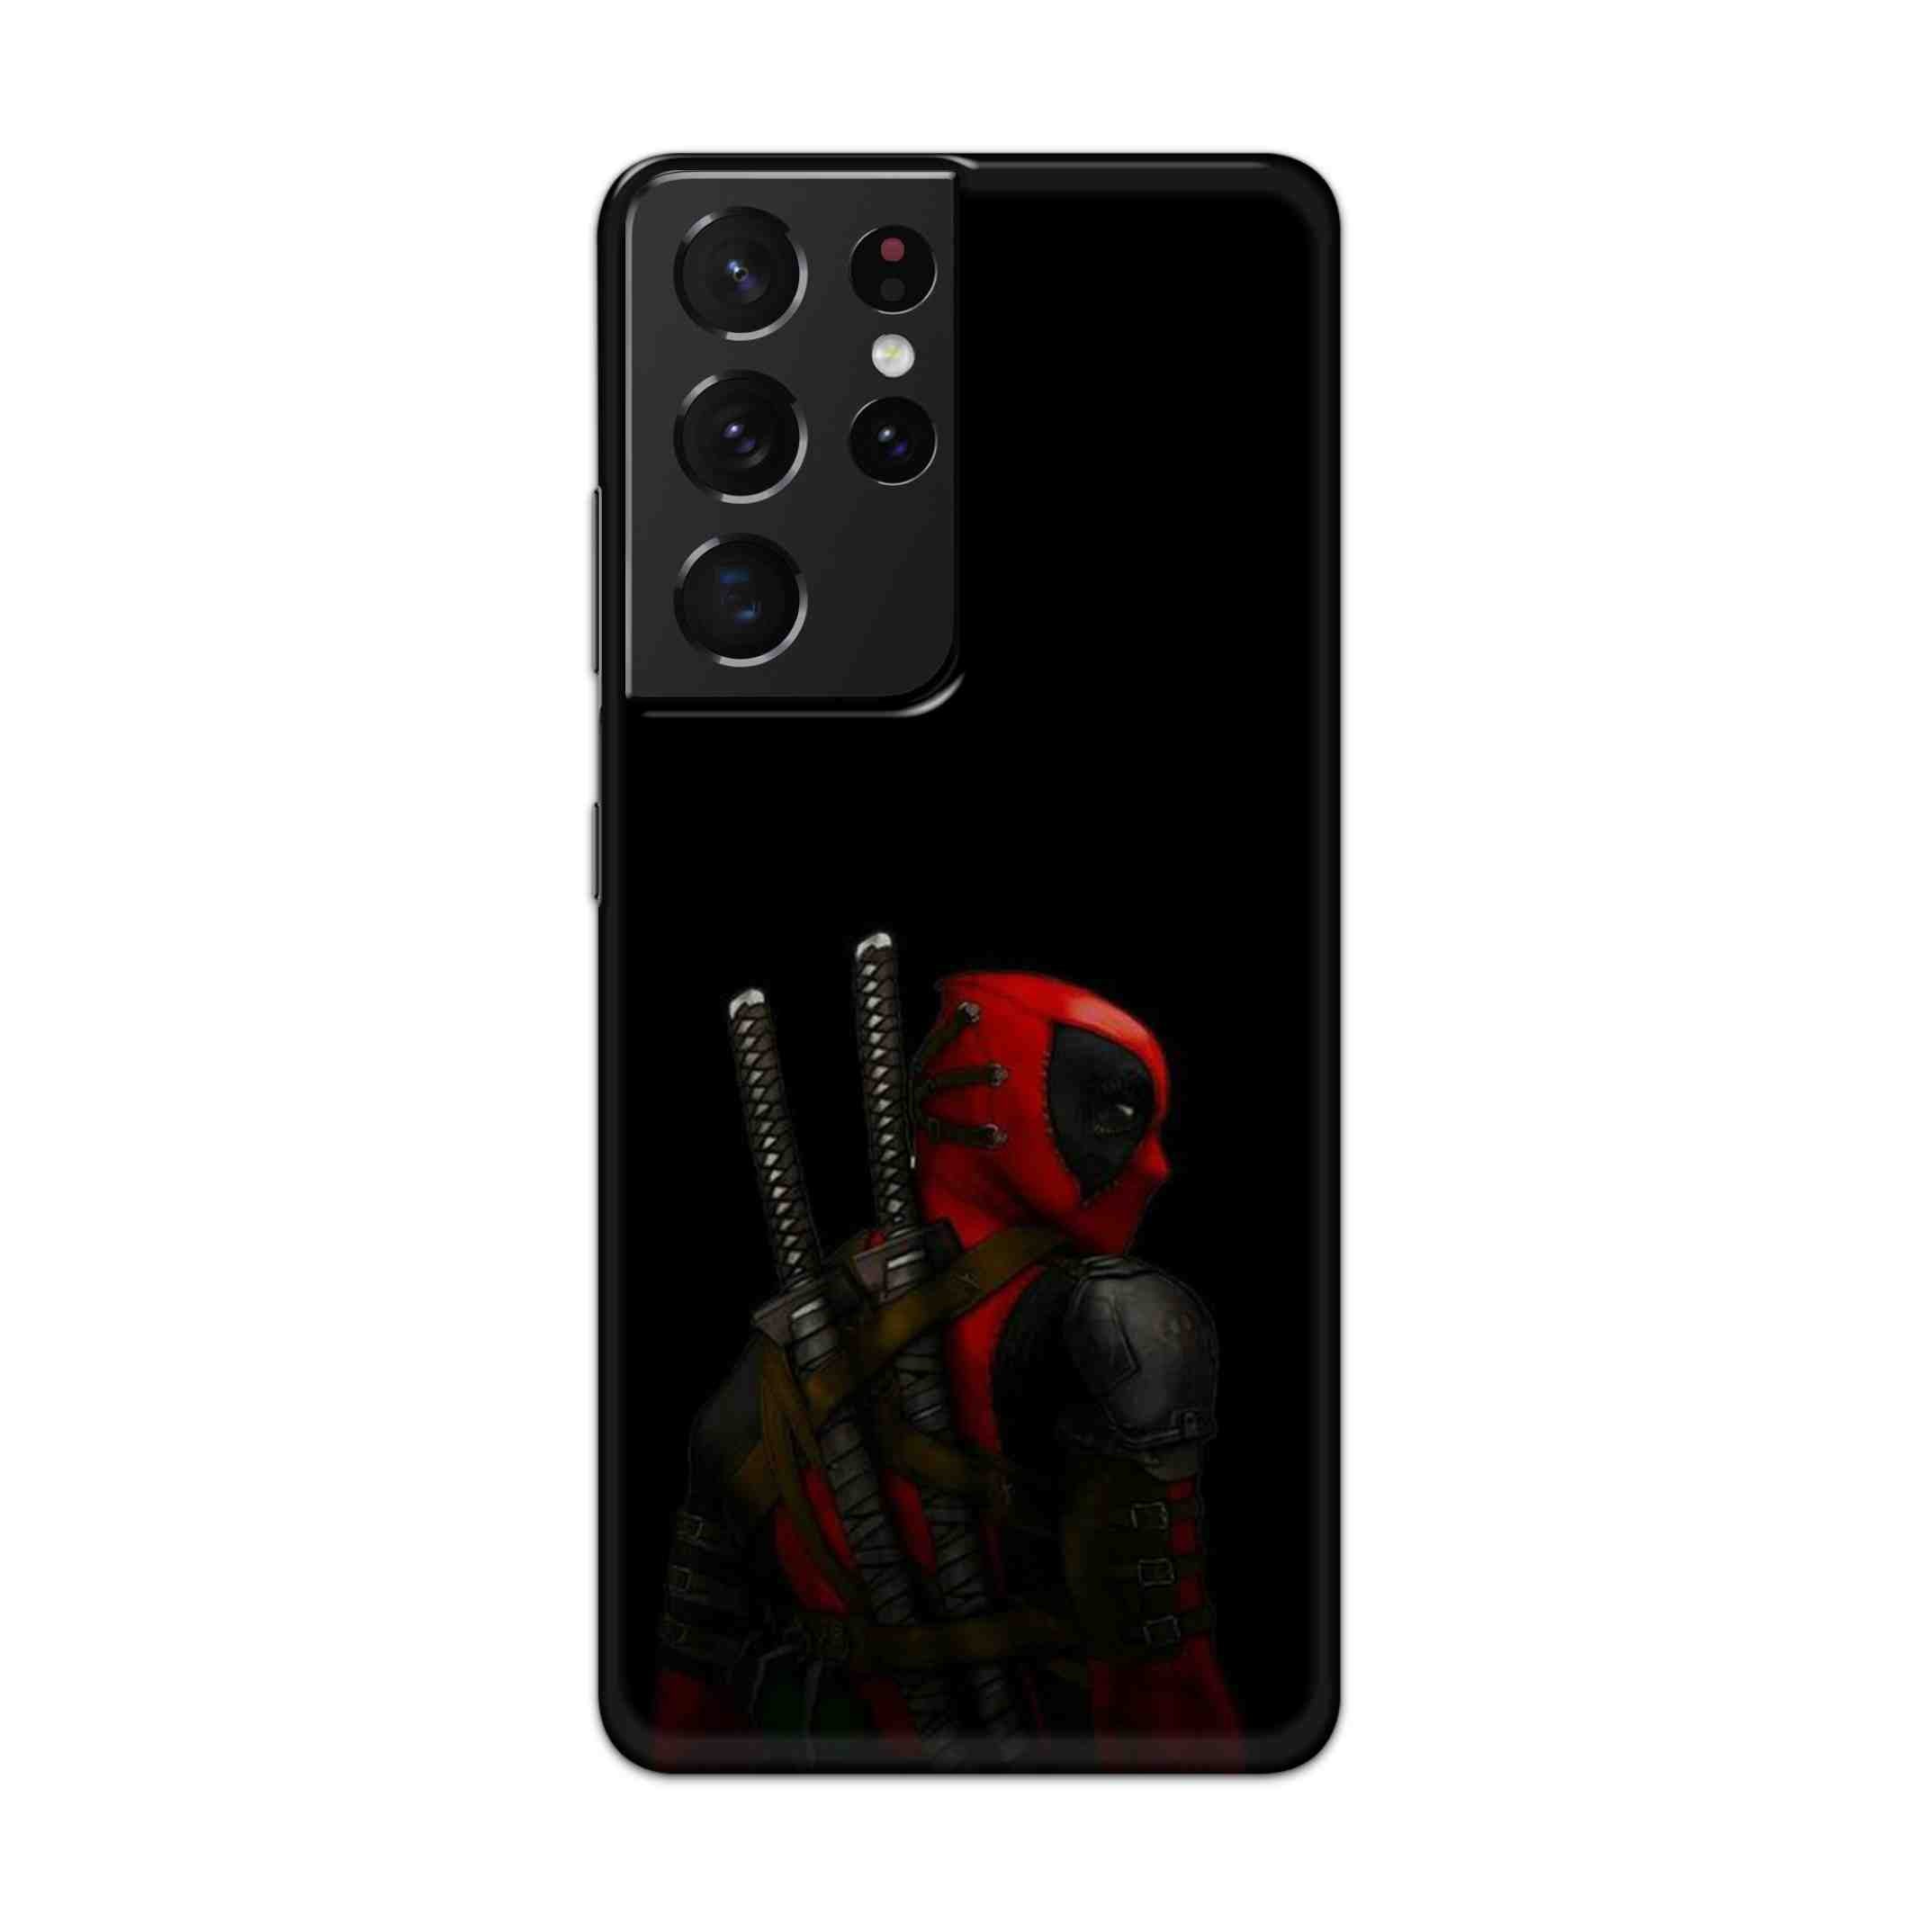 Buy Deadpool Hard Back Mobile Phone Case Cover For Samsung Galaxy S21 Ultra Online